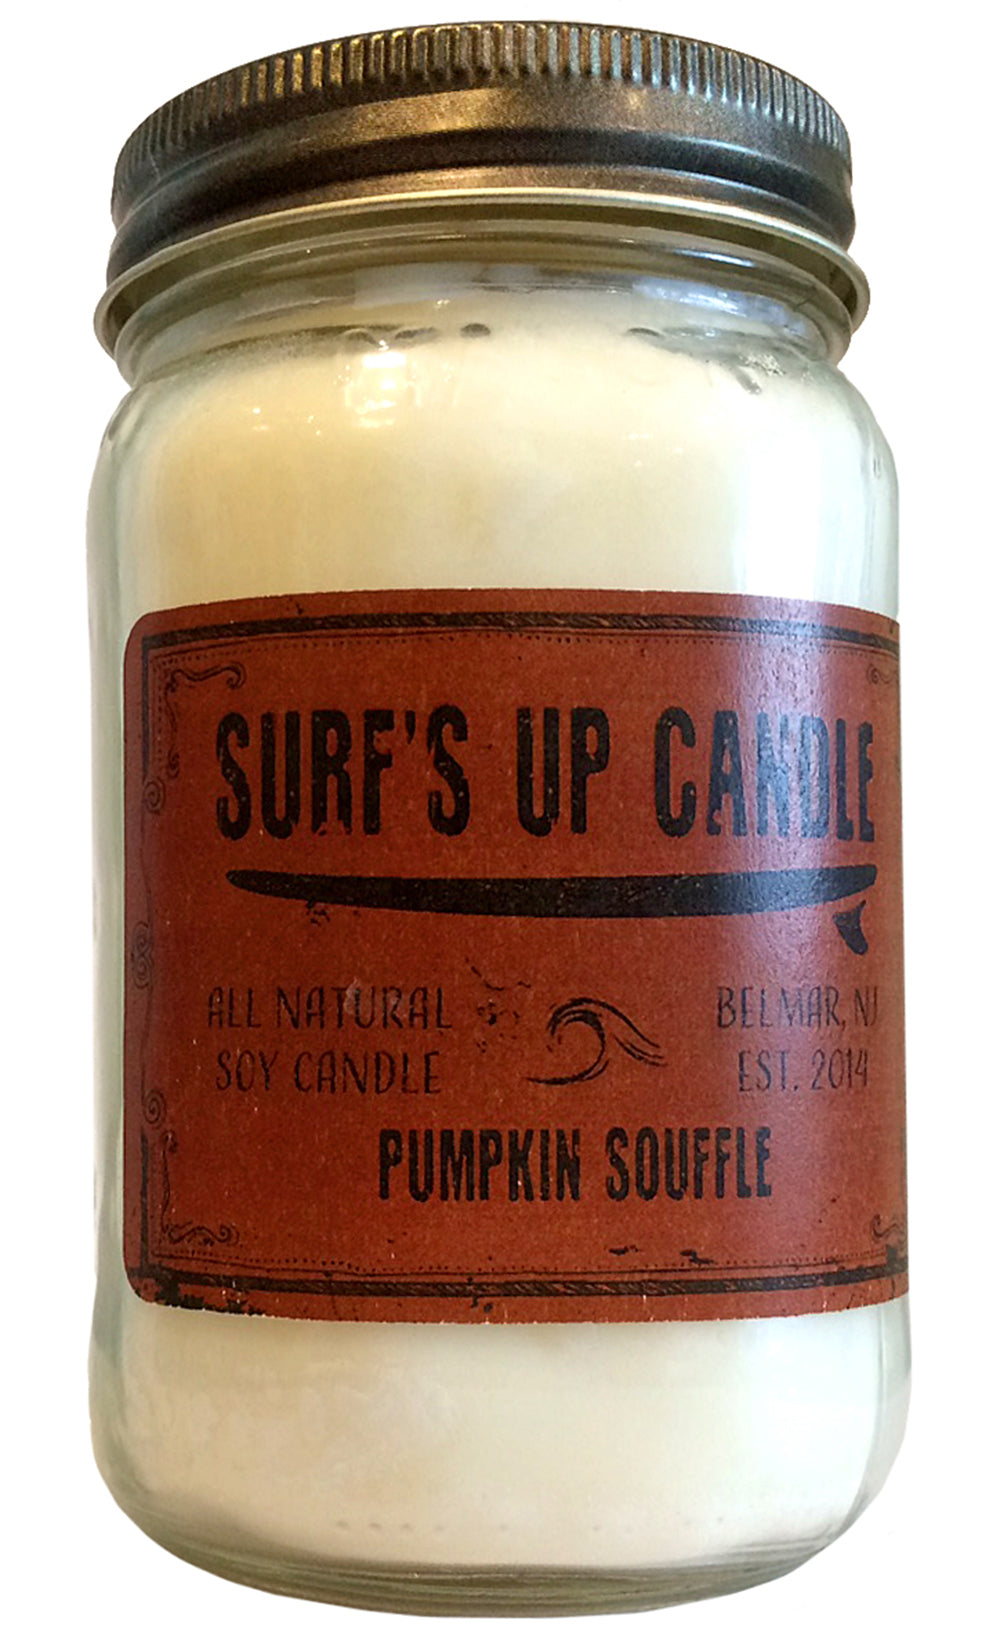 surfs up candle pumpkin souffle soy candle